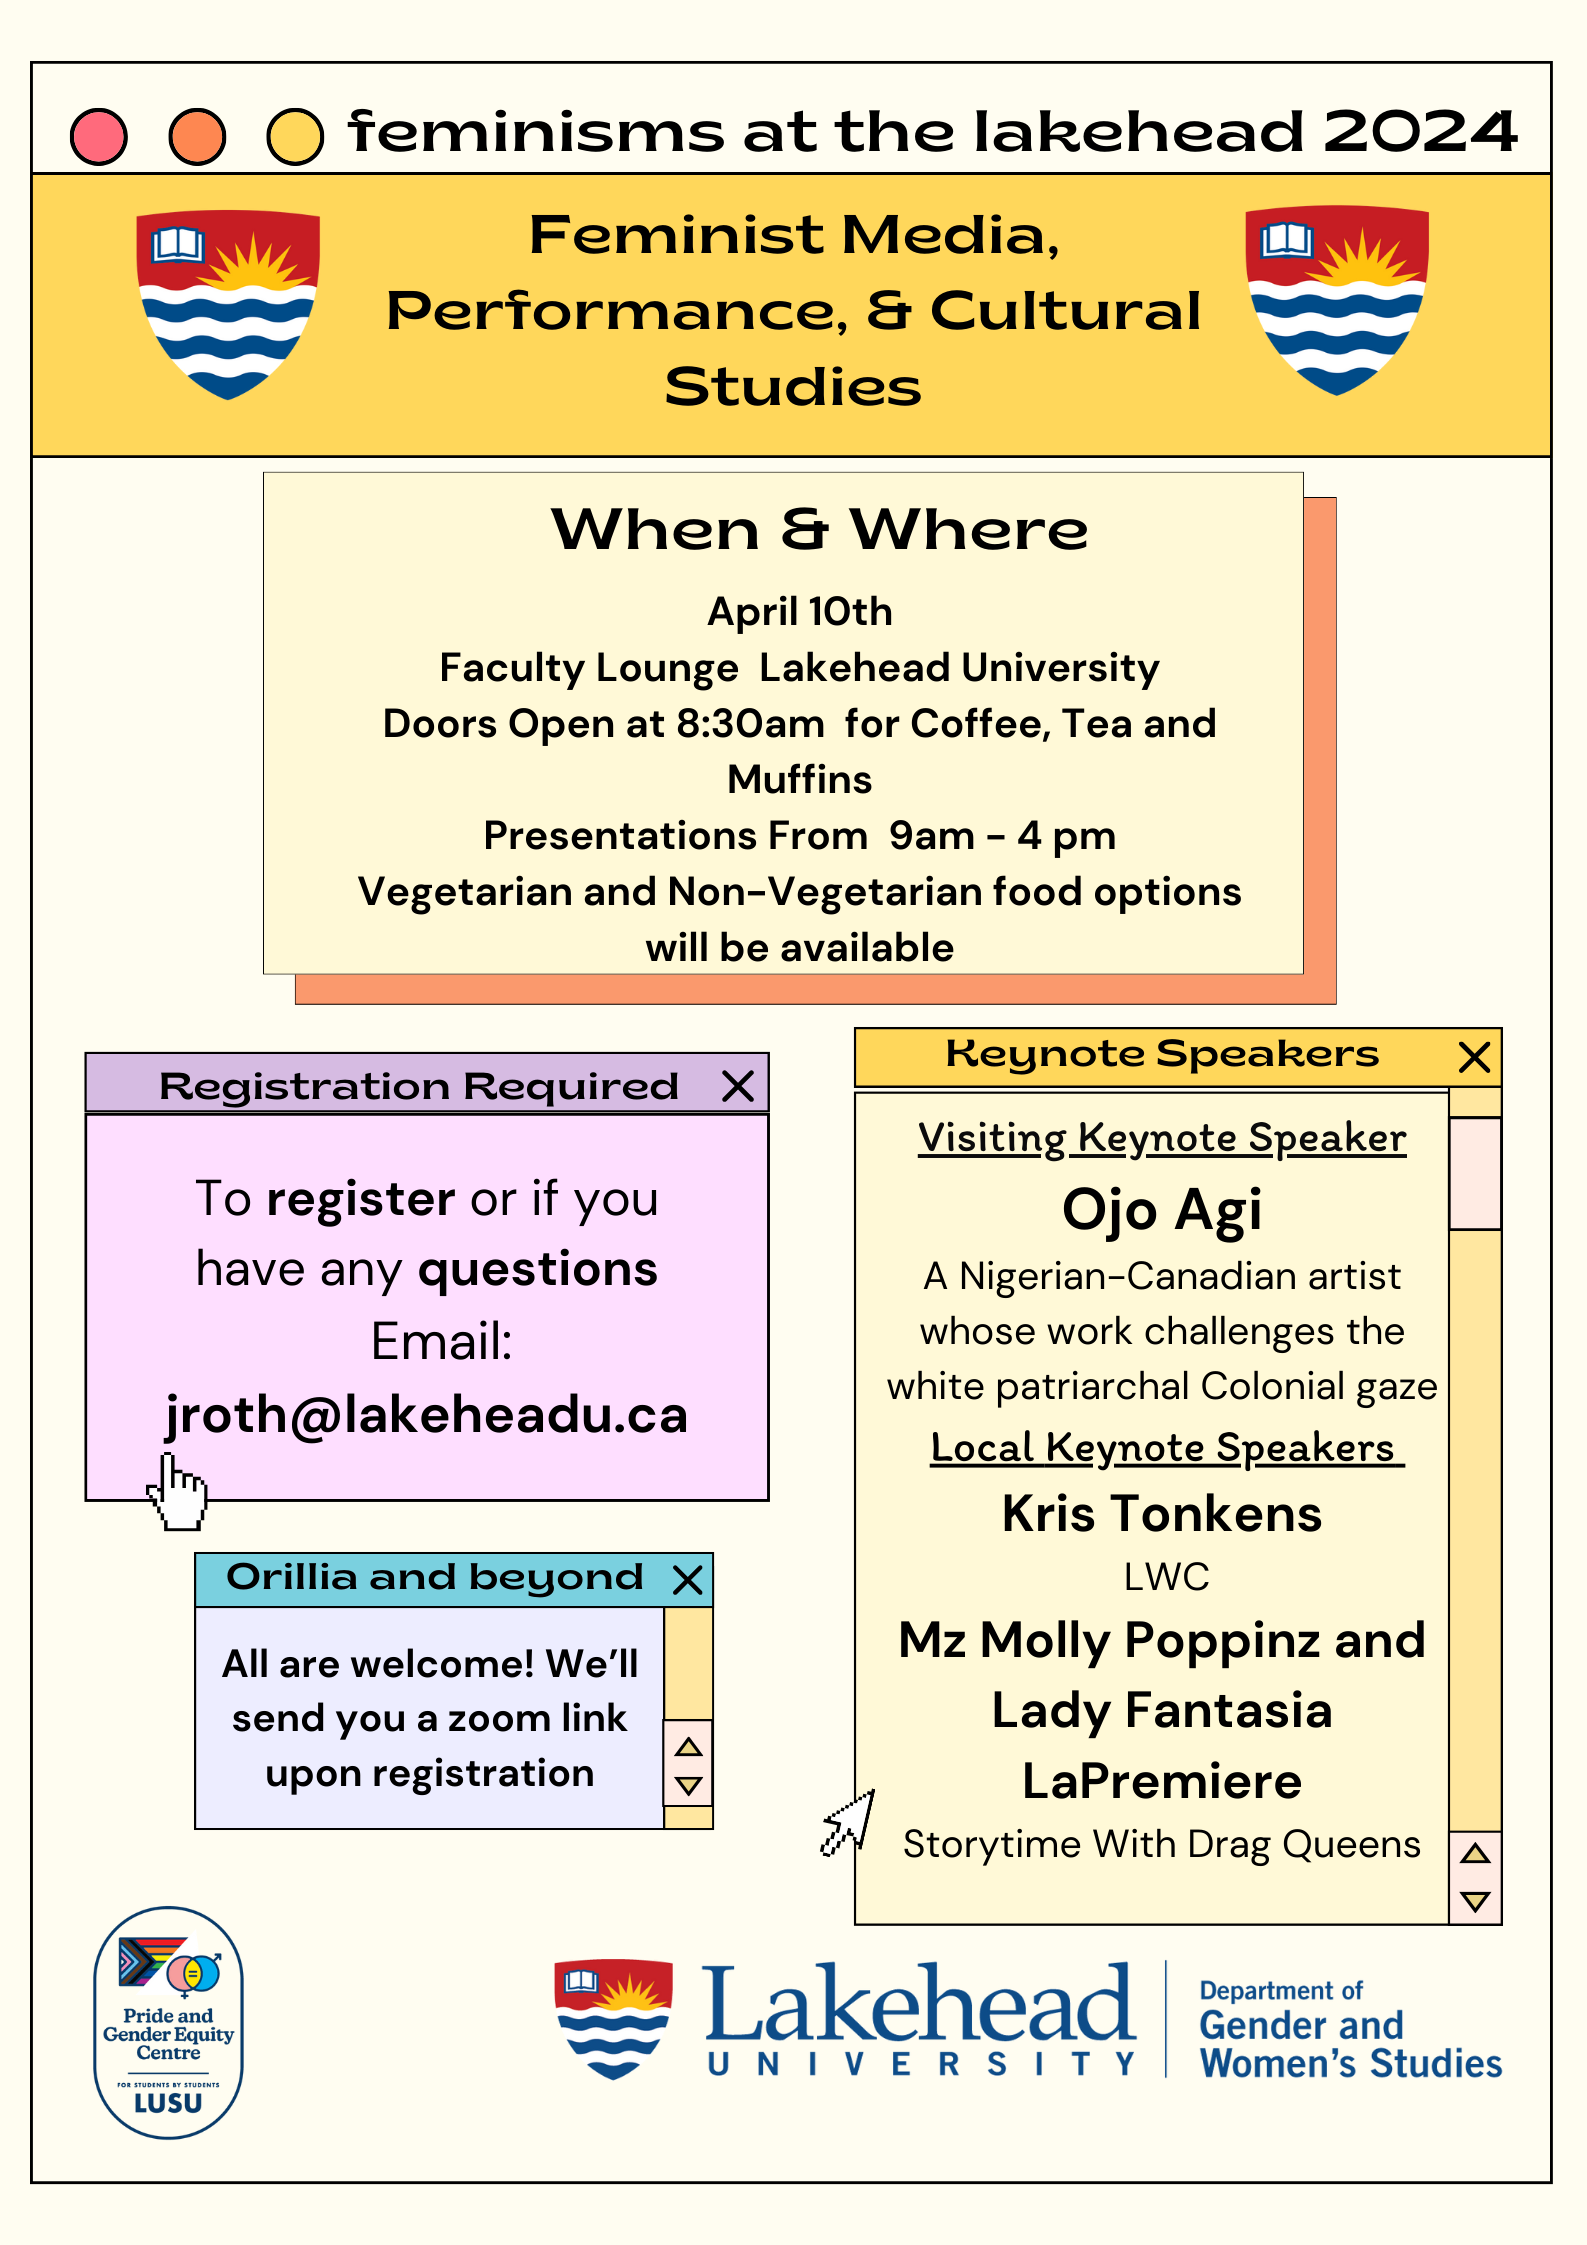 Event details on the poster with the Gender and Women's Studies logo. Event details are provided on the webpage.